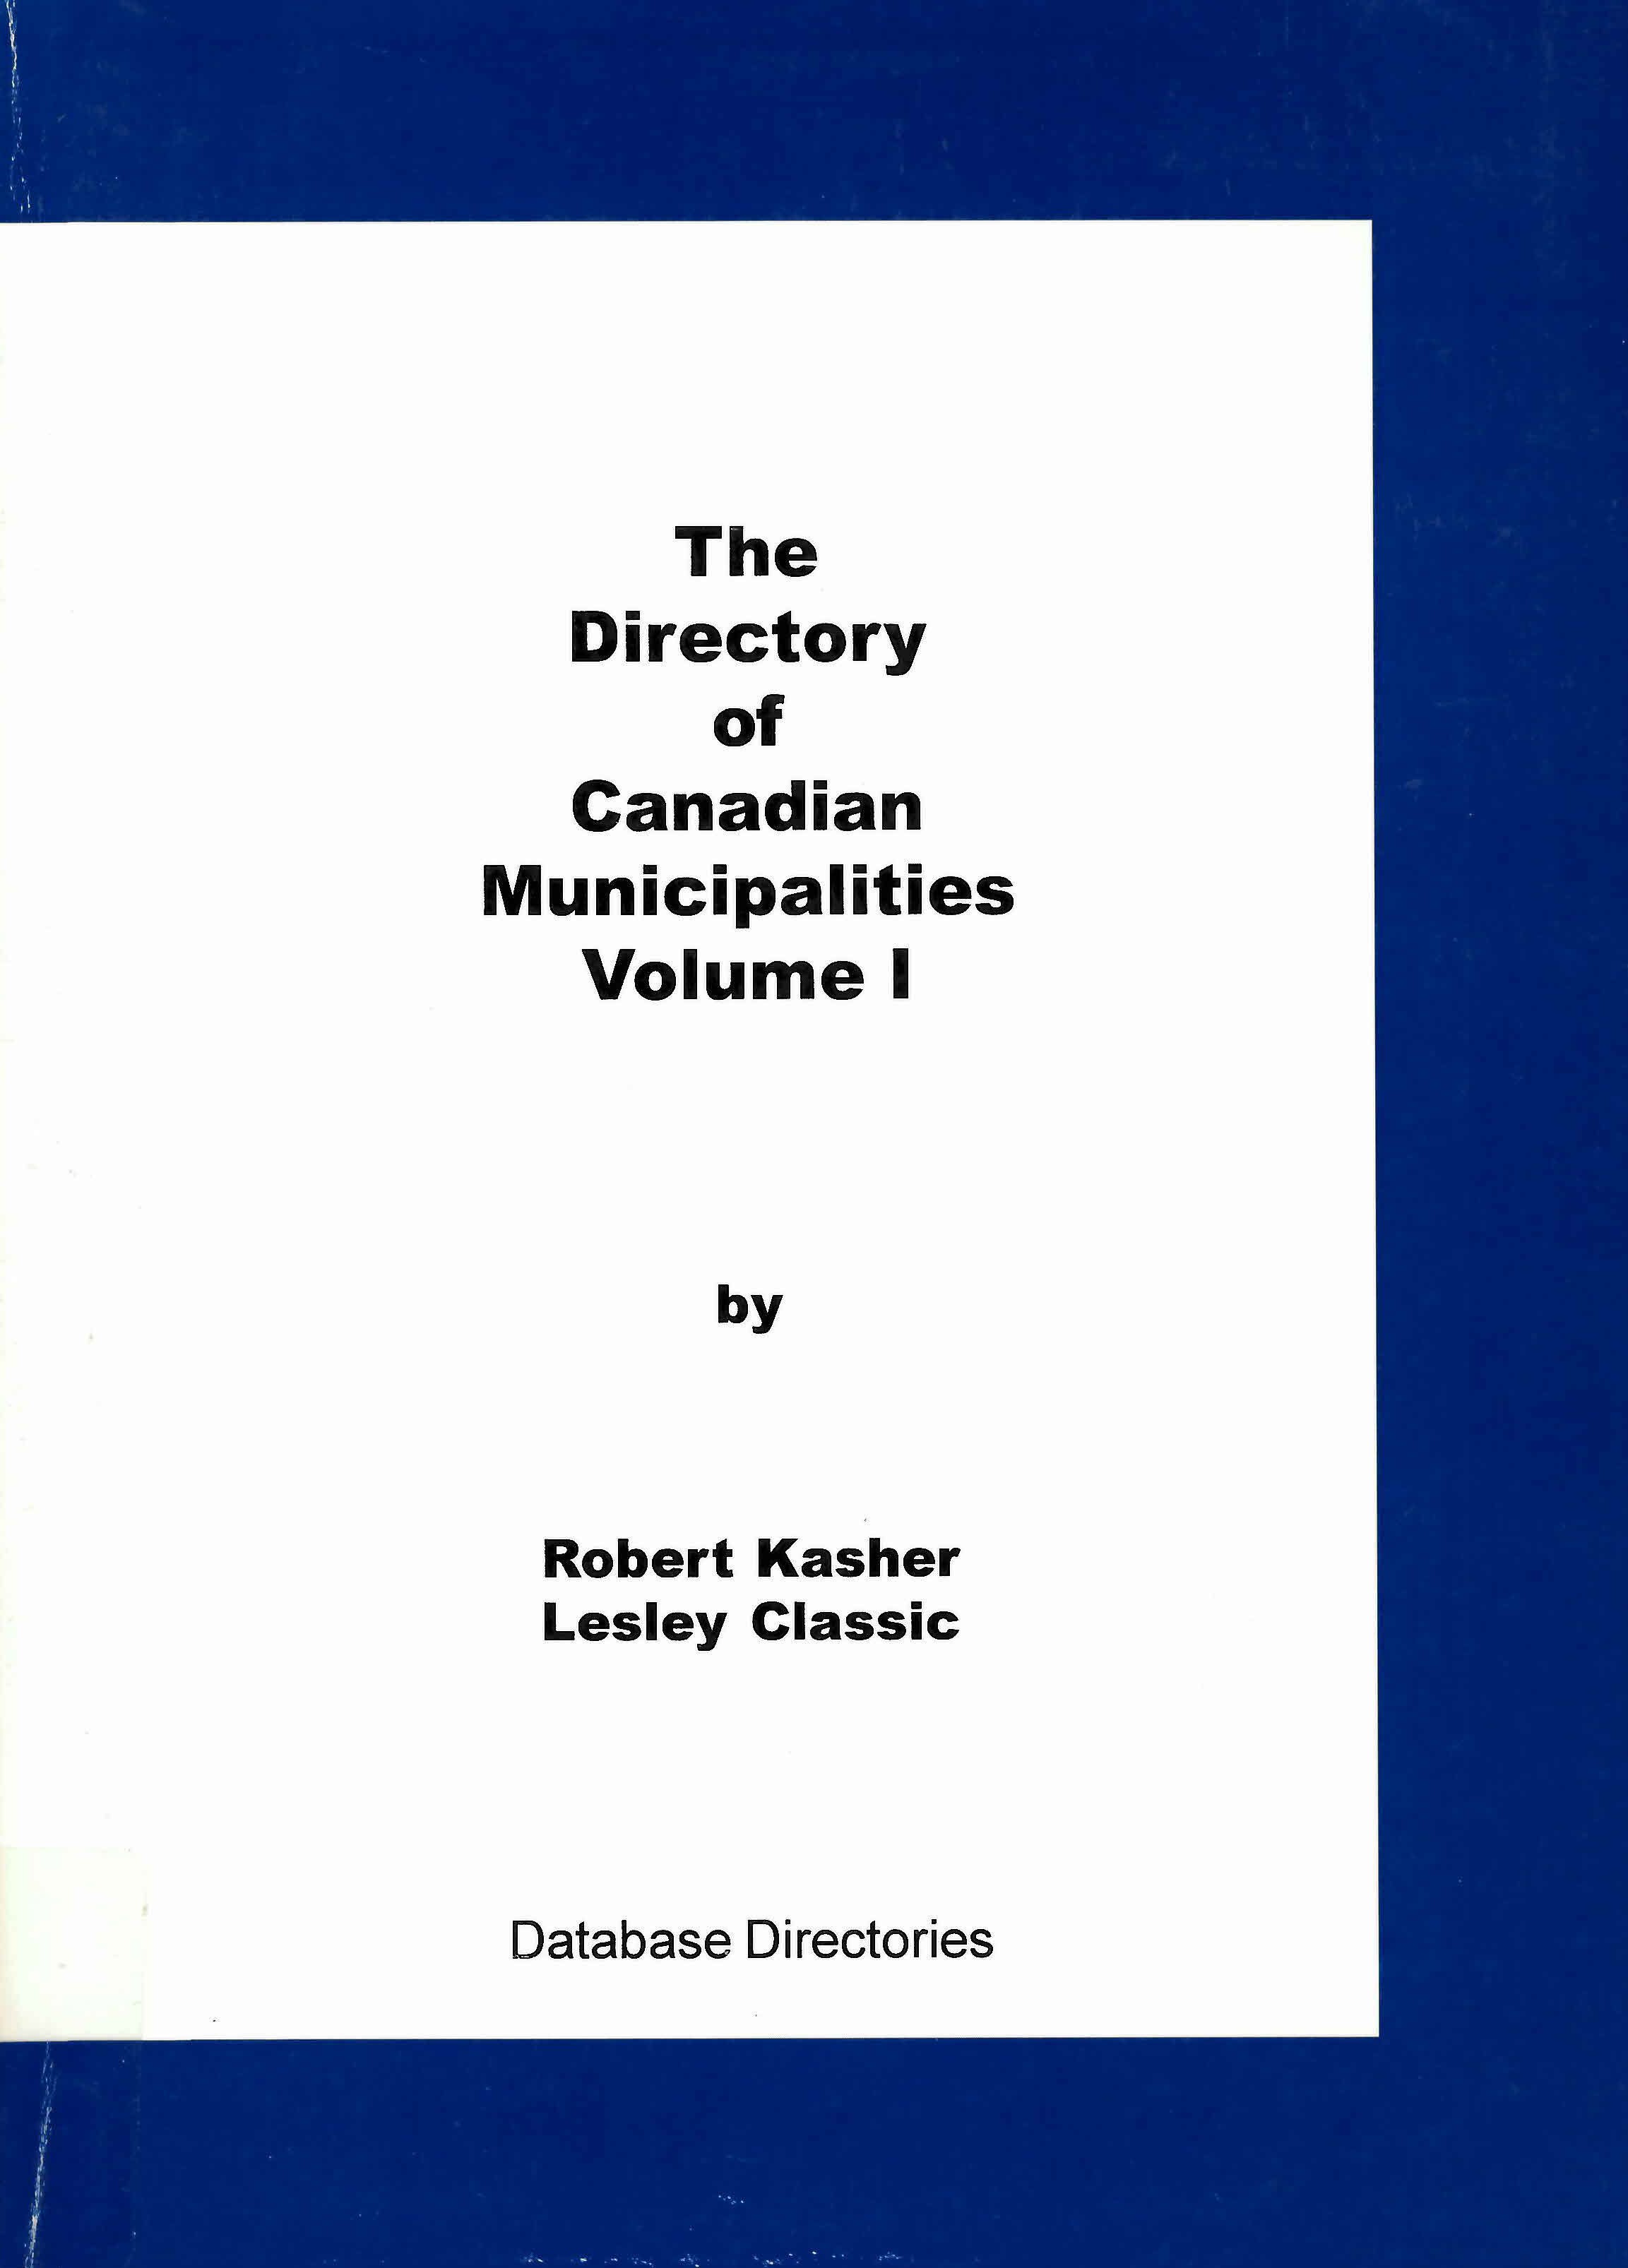 The Directory of Canadian Municipalities